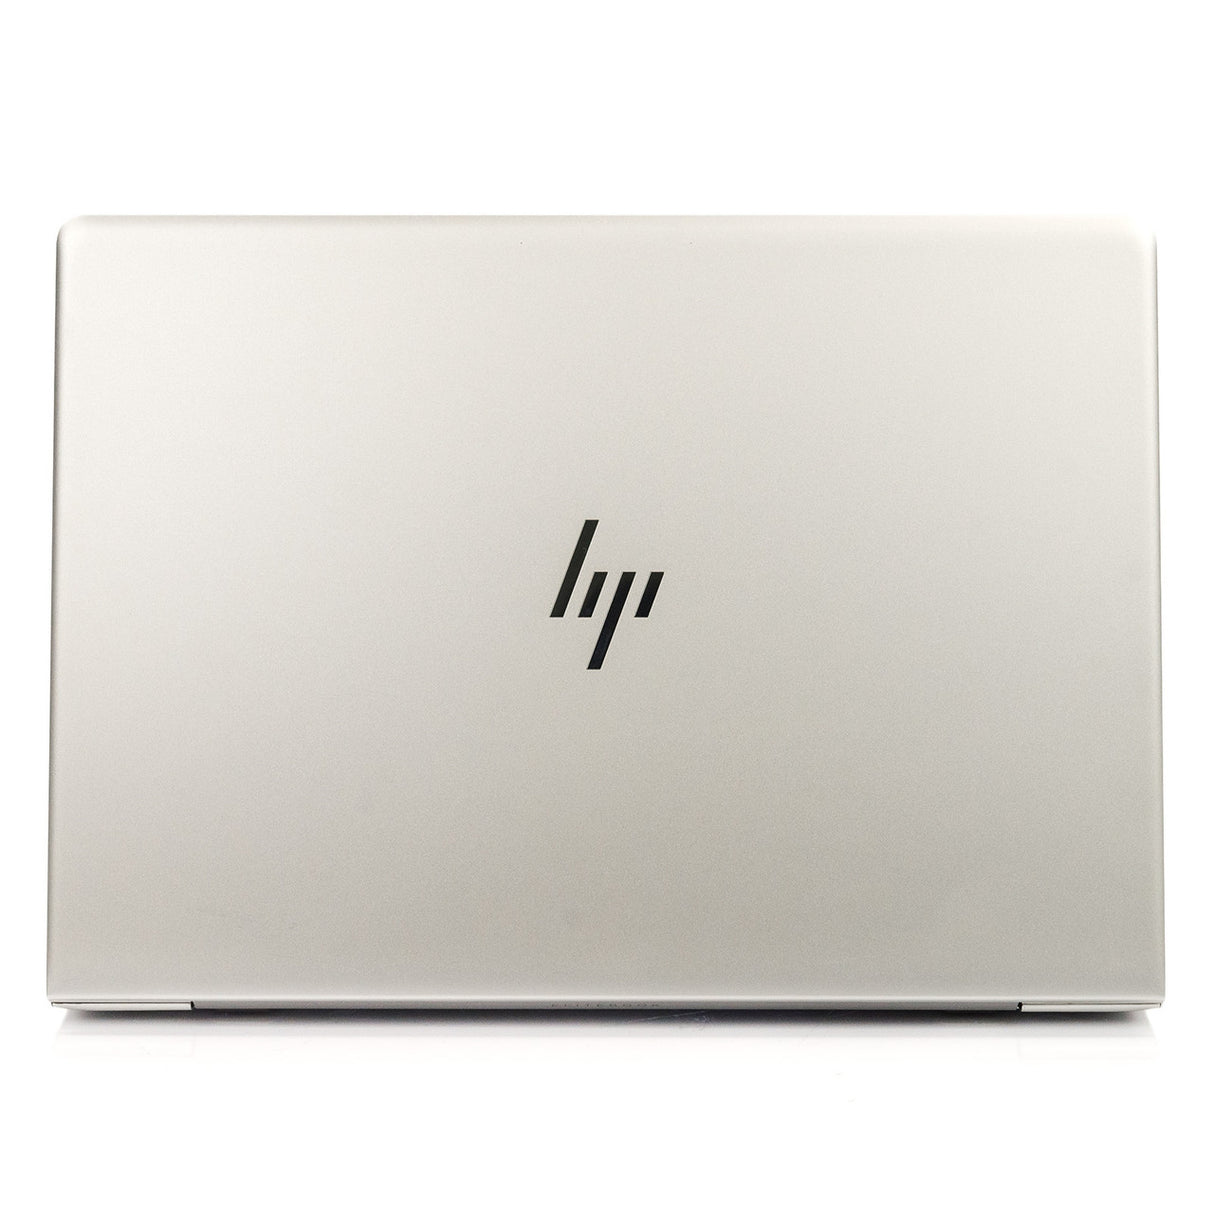 HP Elitebook 840 G6 Laptop Setup and Features